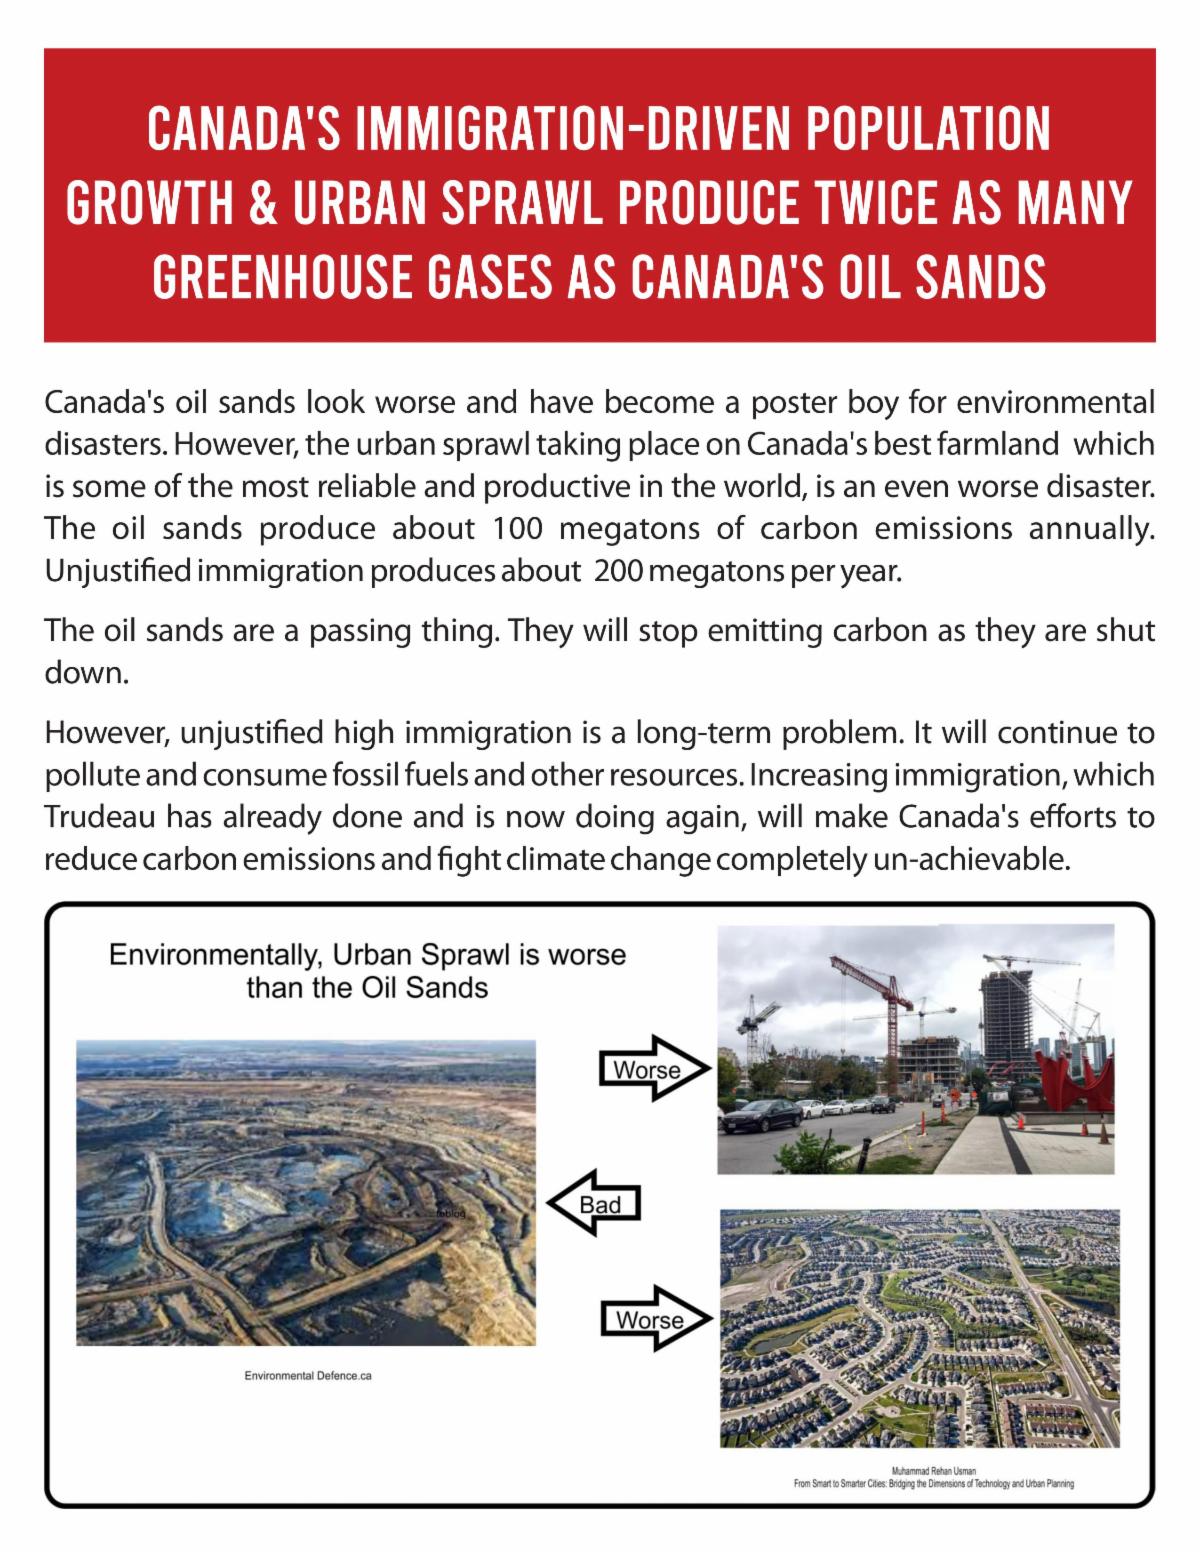 Canada's Immigration-Driven Population Growth causes twice as many GHG's as Our Oil Sands